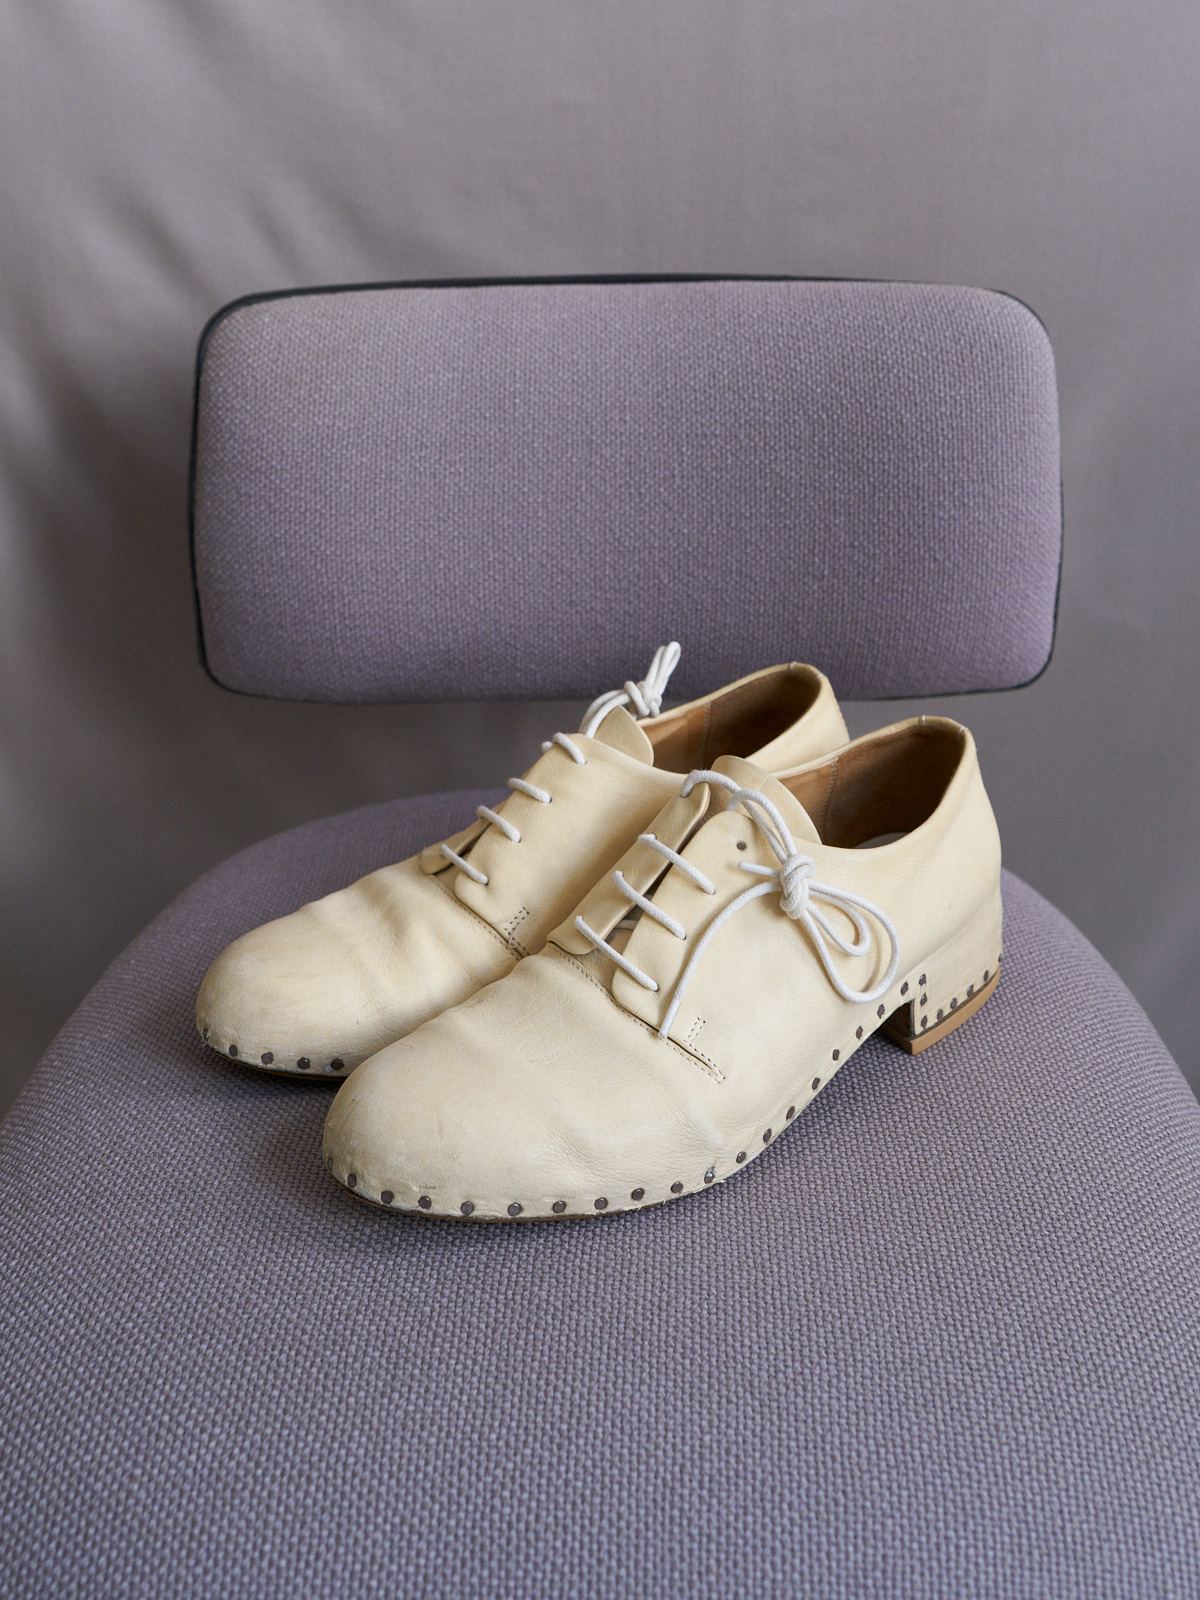 Maison Martin Margiela 2000s cream leather visible tack derby shoes - size 38